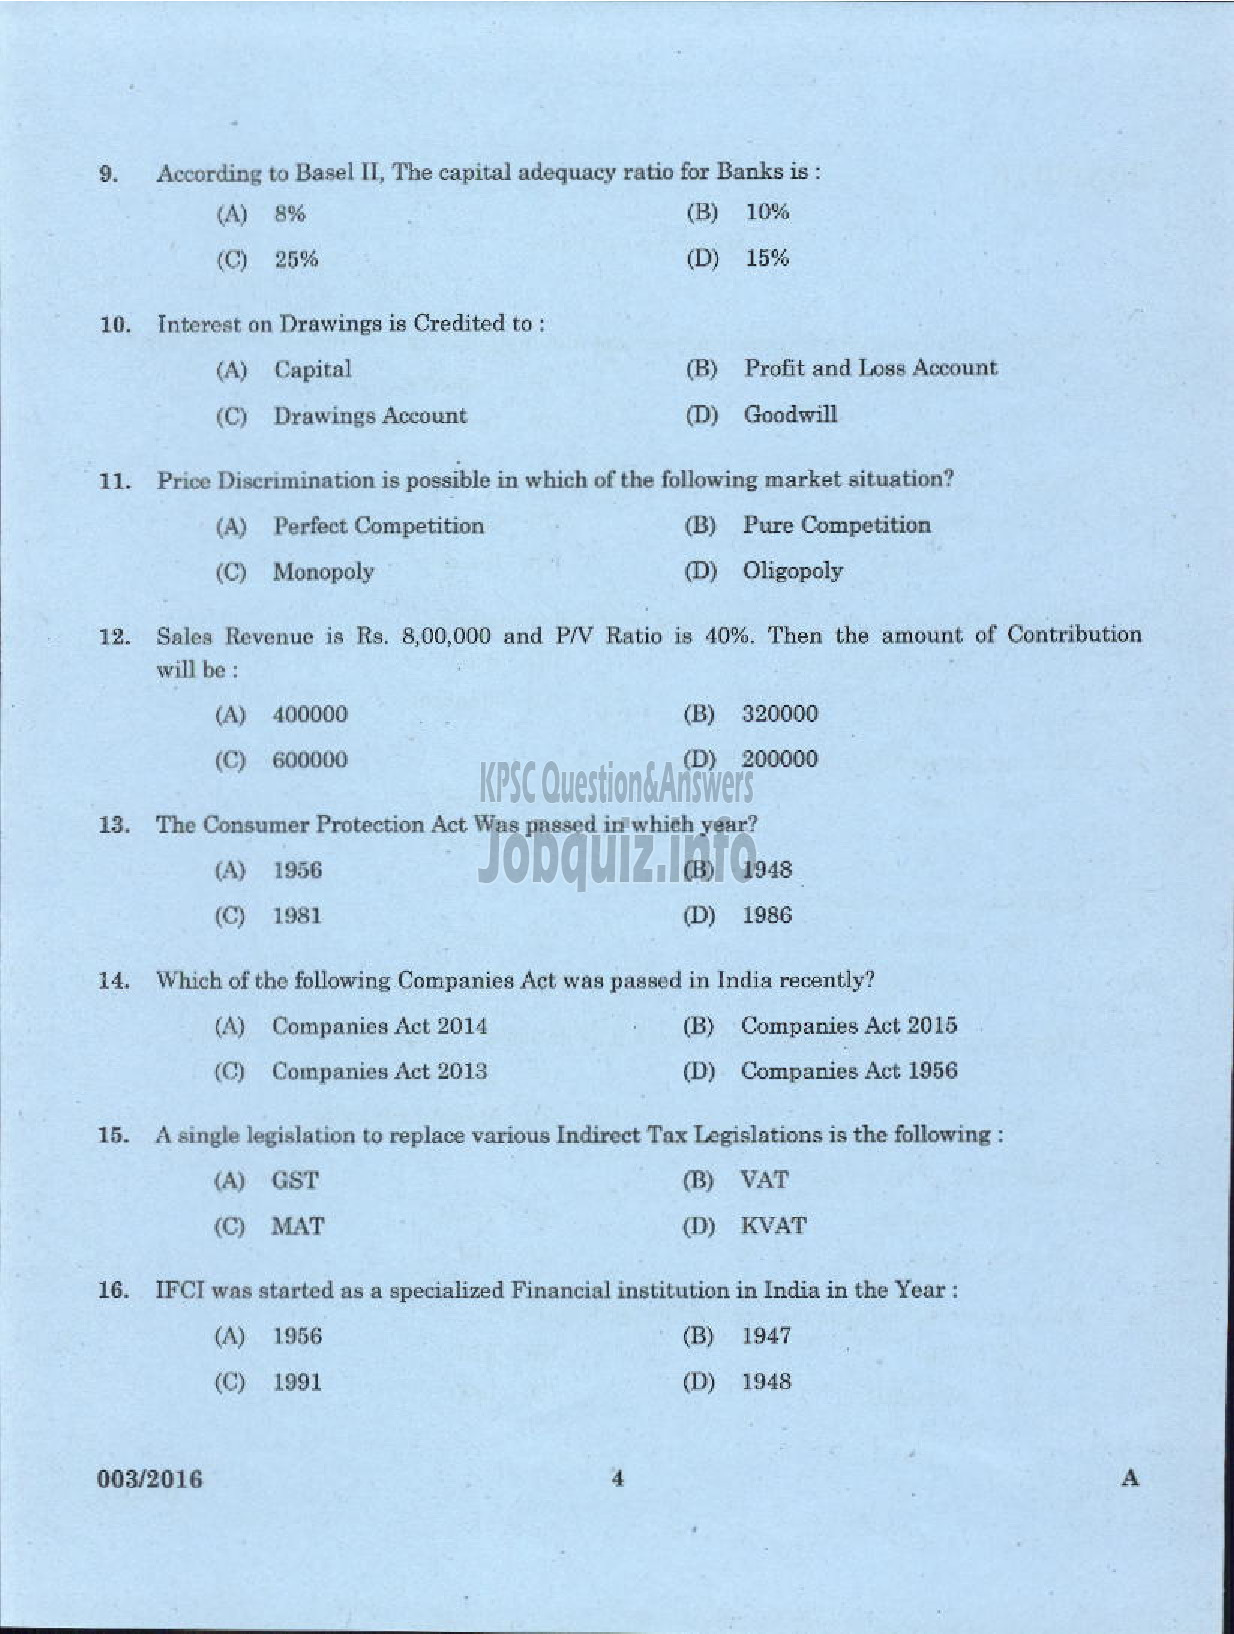 Kerala PSC Question Paper - VOCATIONAL TEACHER IN ACCOUNTANCY AND AUDTING VHSE-2